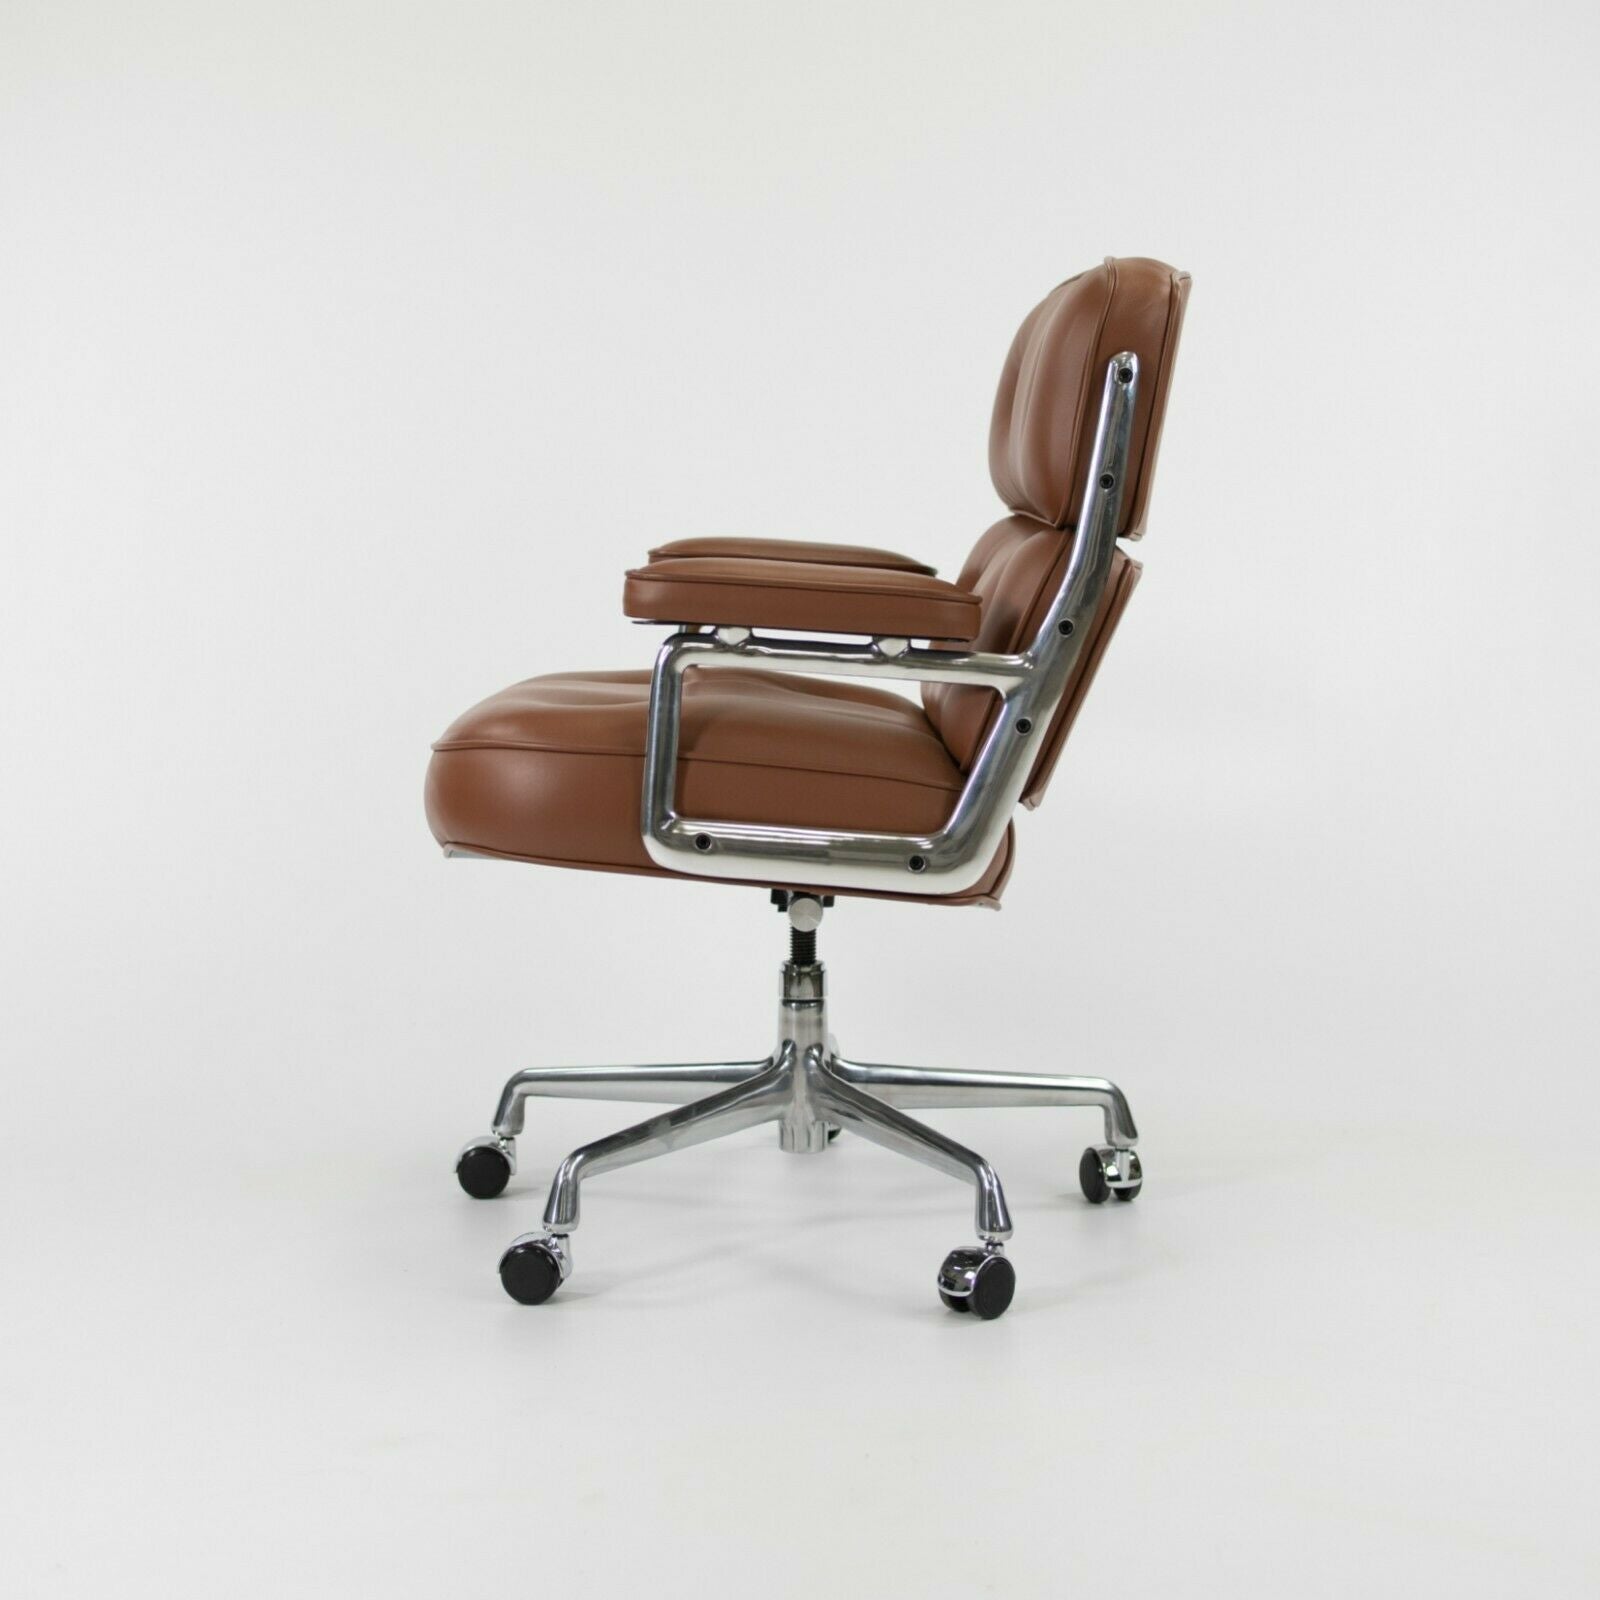 SOLD 2021 Herman Miller Eames Time Life Executive Desk Chair Cobblestone MCL Leather